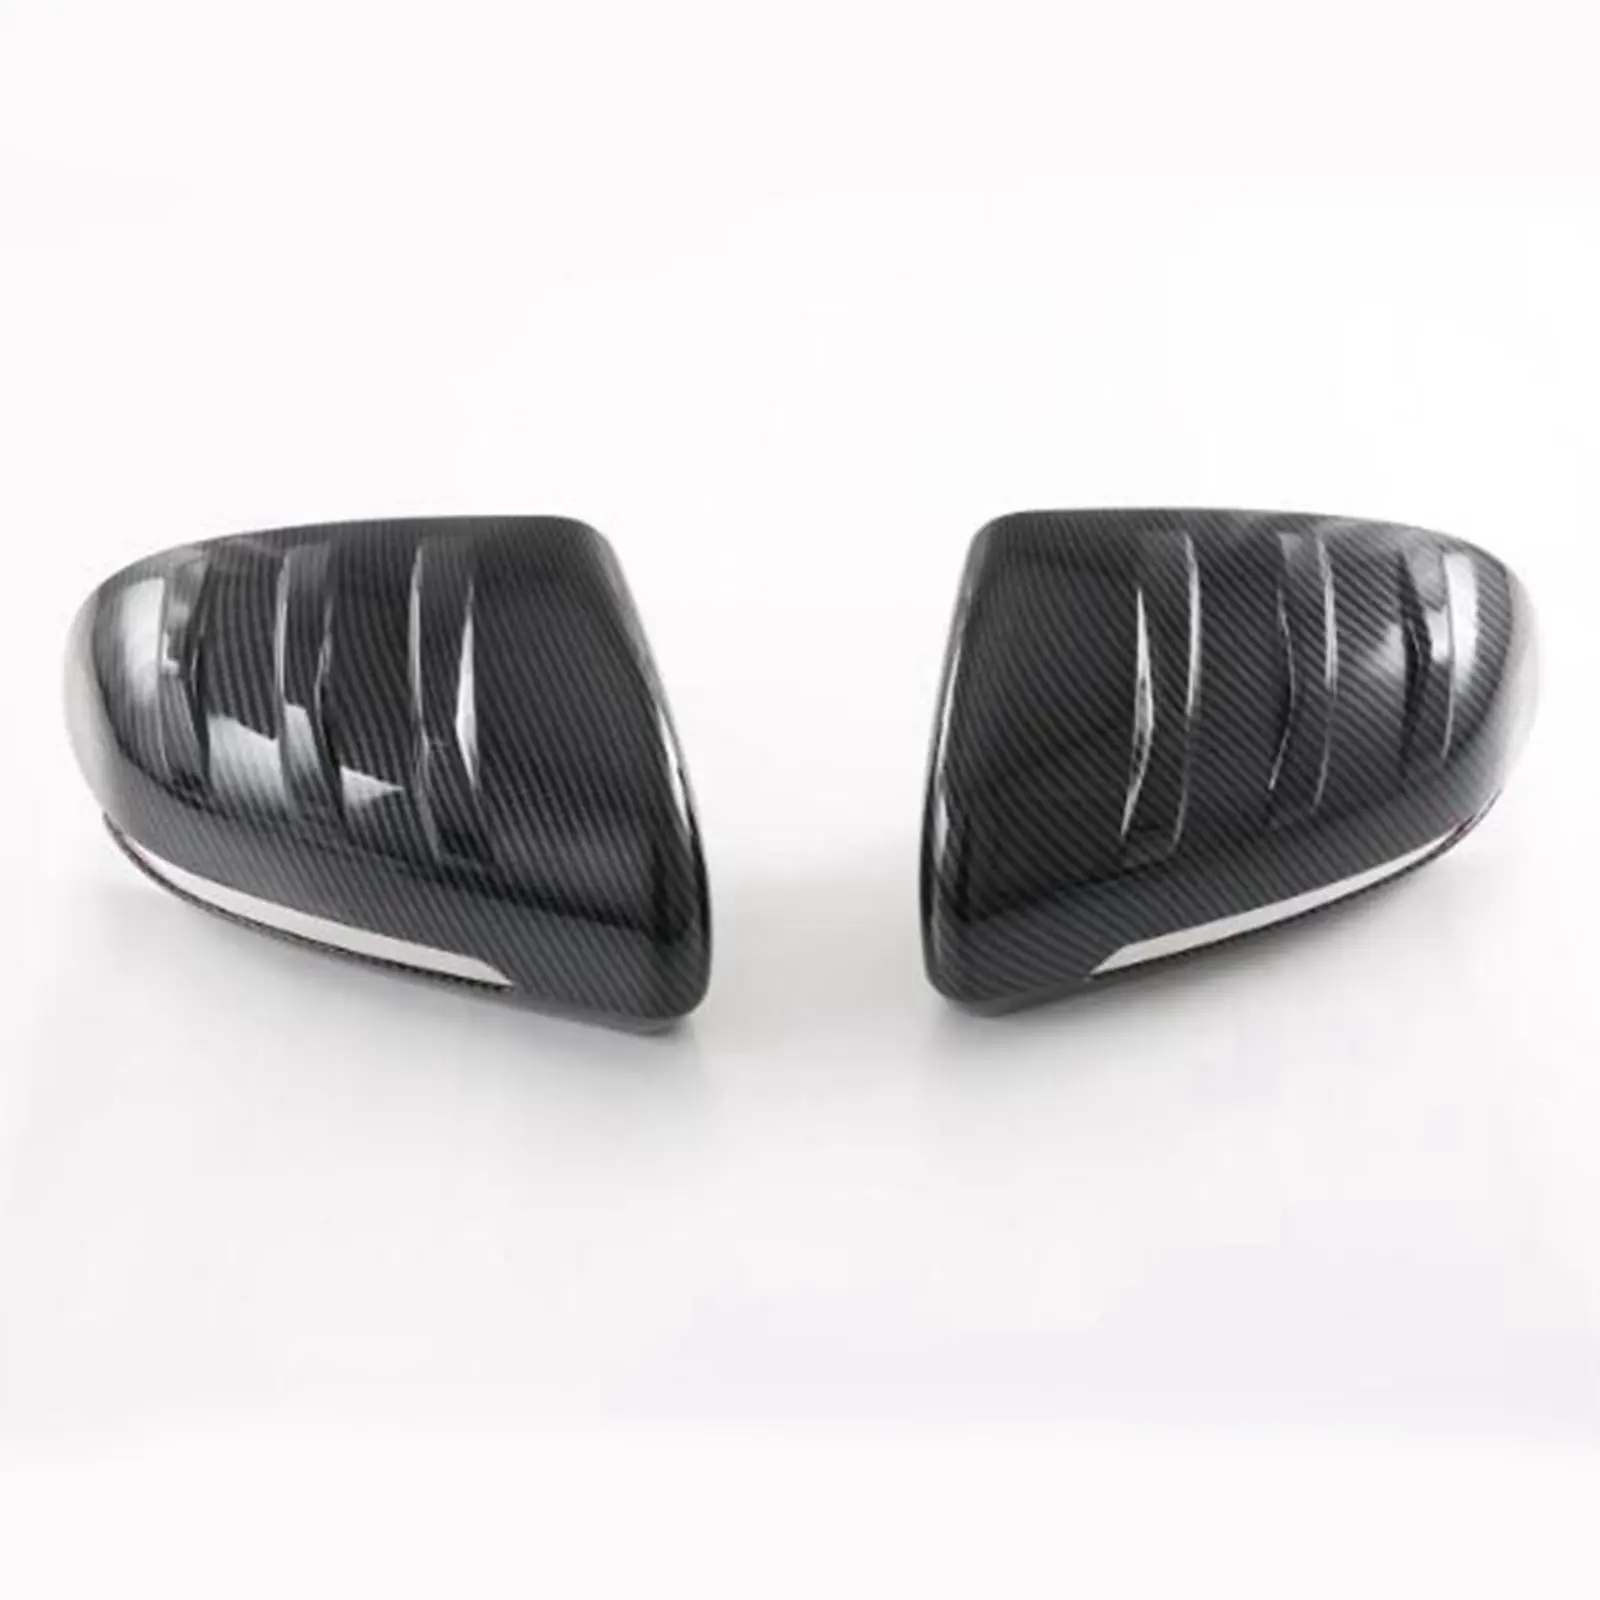 Rearview Side Mirror Covers Caps Trim External Decoration Decoration Professional for Byd Atto 3 2022 Replacement Premium